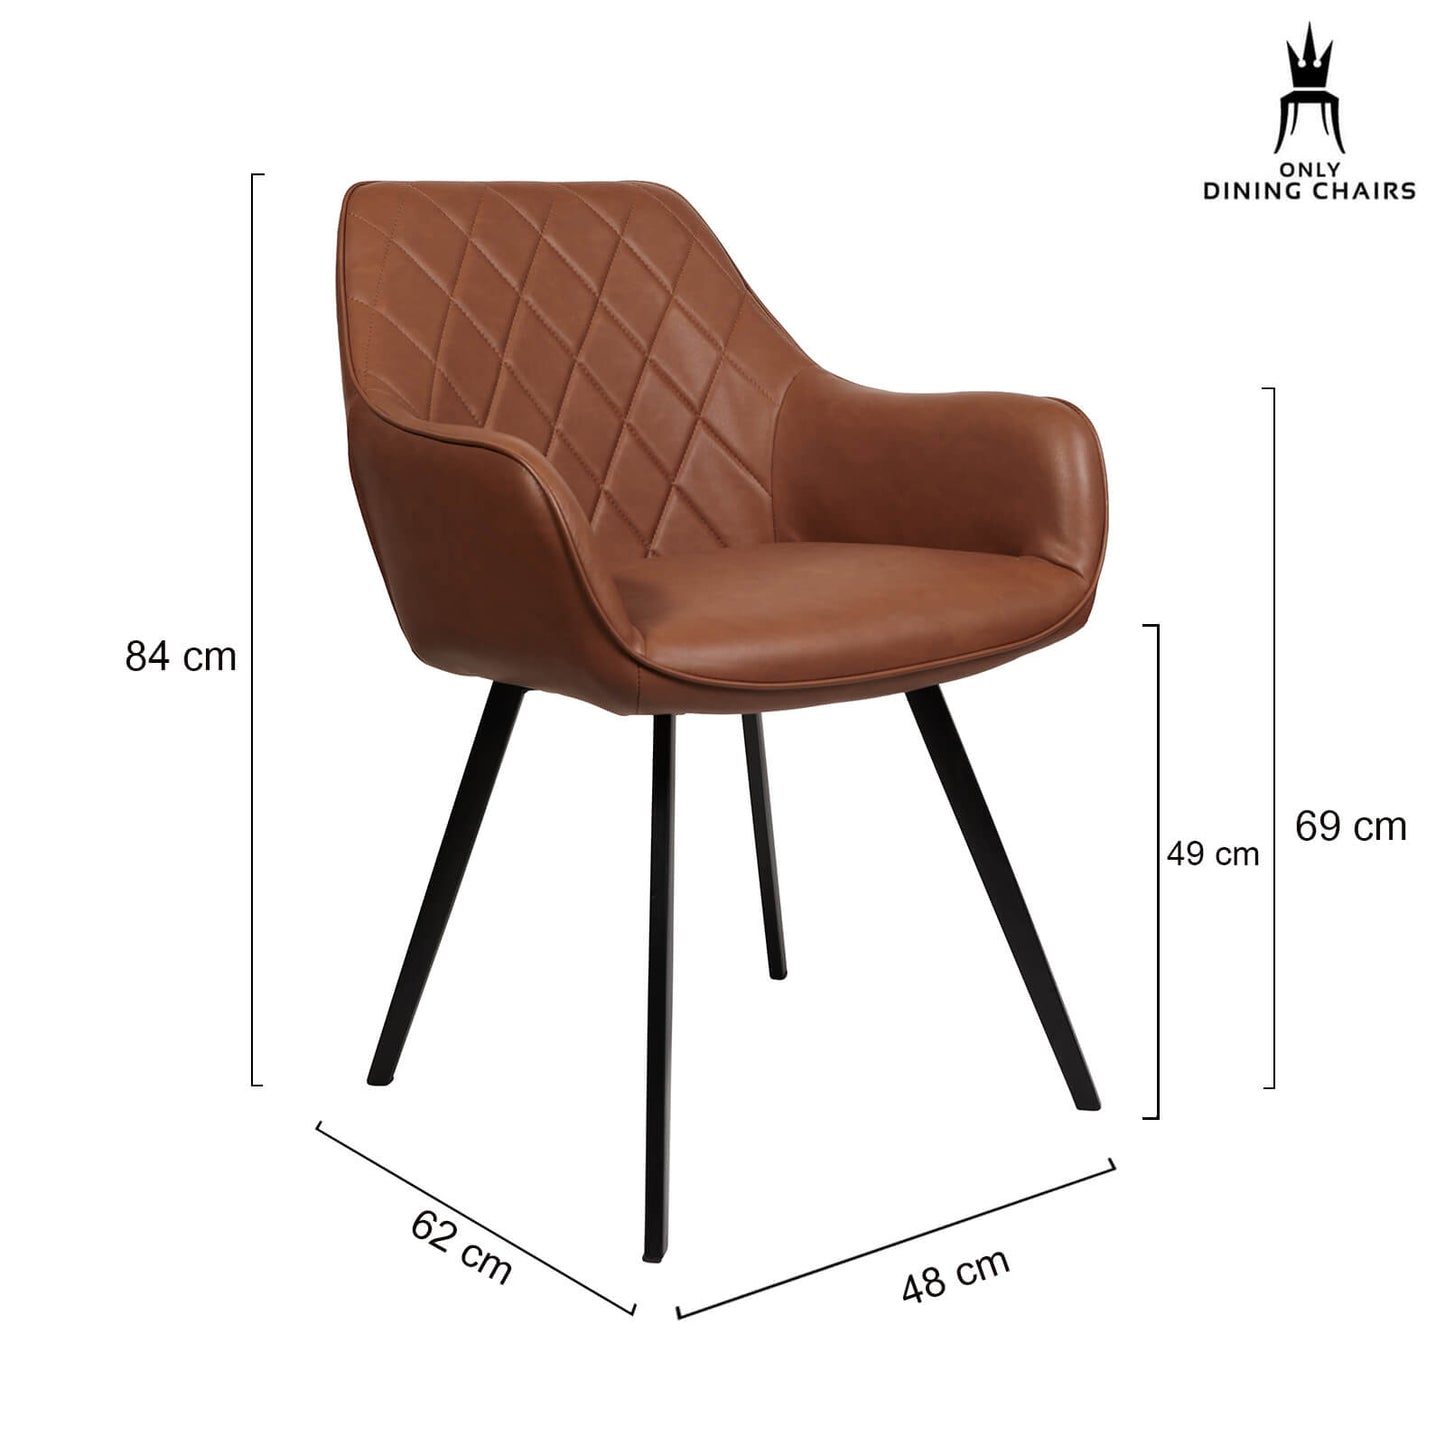 Granville | Modern Fabric PU Leather Dining Chairs With Arms | Set Of 2 | Cognac